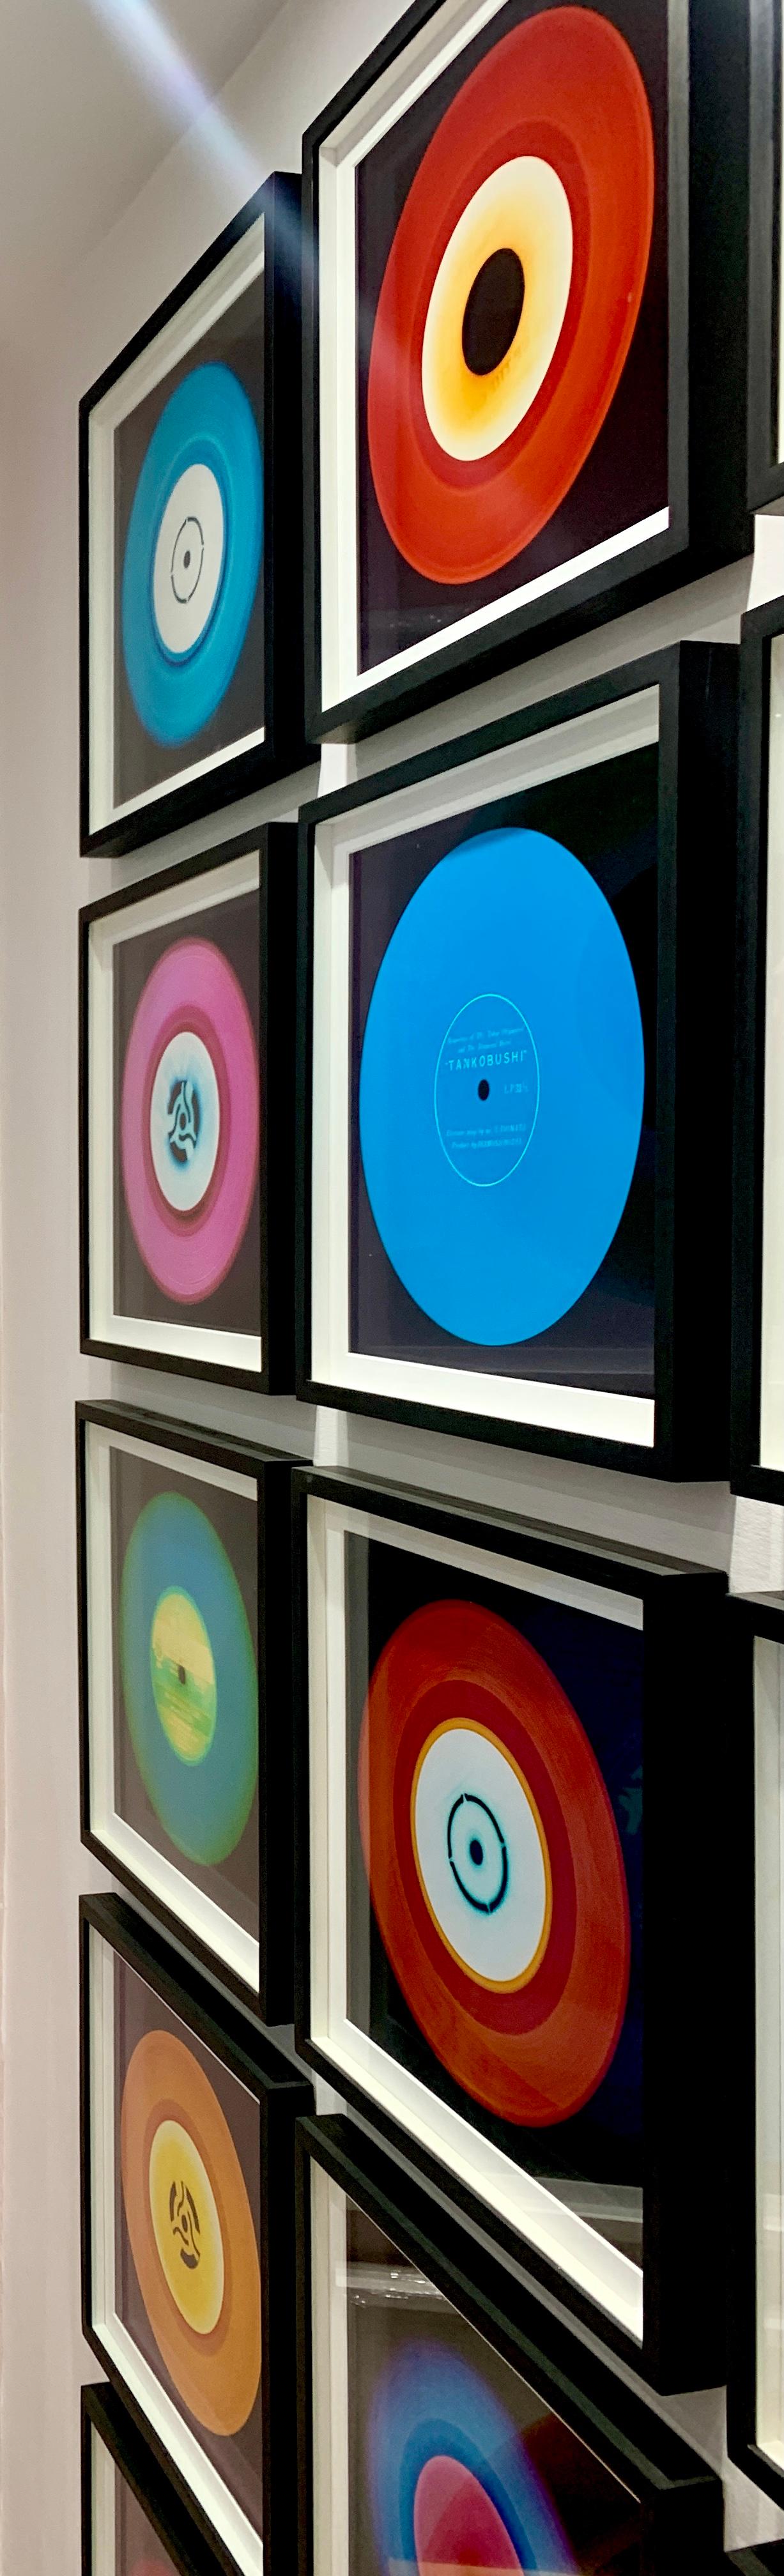 Heidler & Heeps Vinyl Collection Fifteen Piece Rainbow Installation.
Acclaimed contemporary photographers, Richard Heeps and Natasha Heidler have collaborated to make this beautifully mesmerising collection. A celebration of the vinyl record and